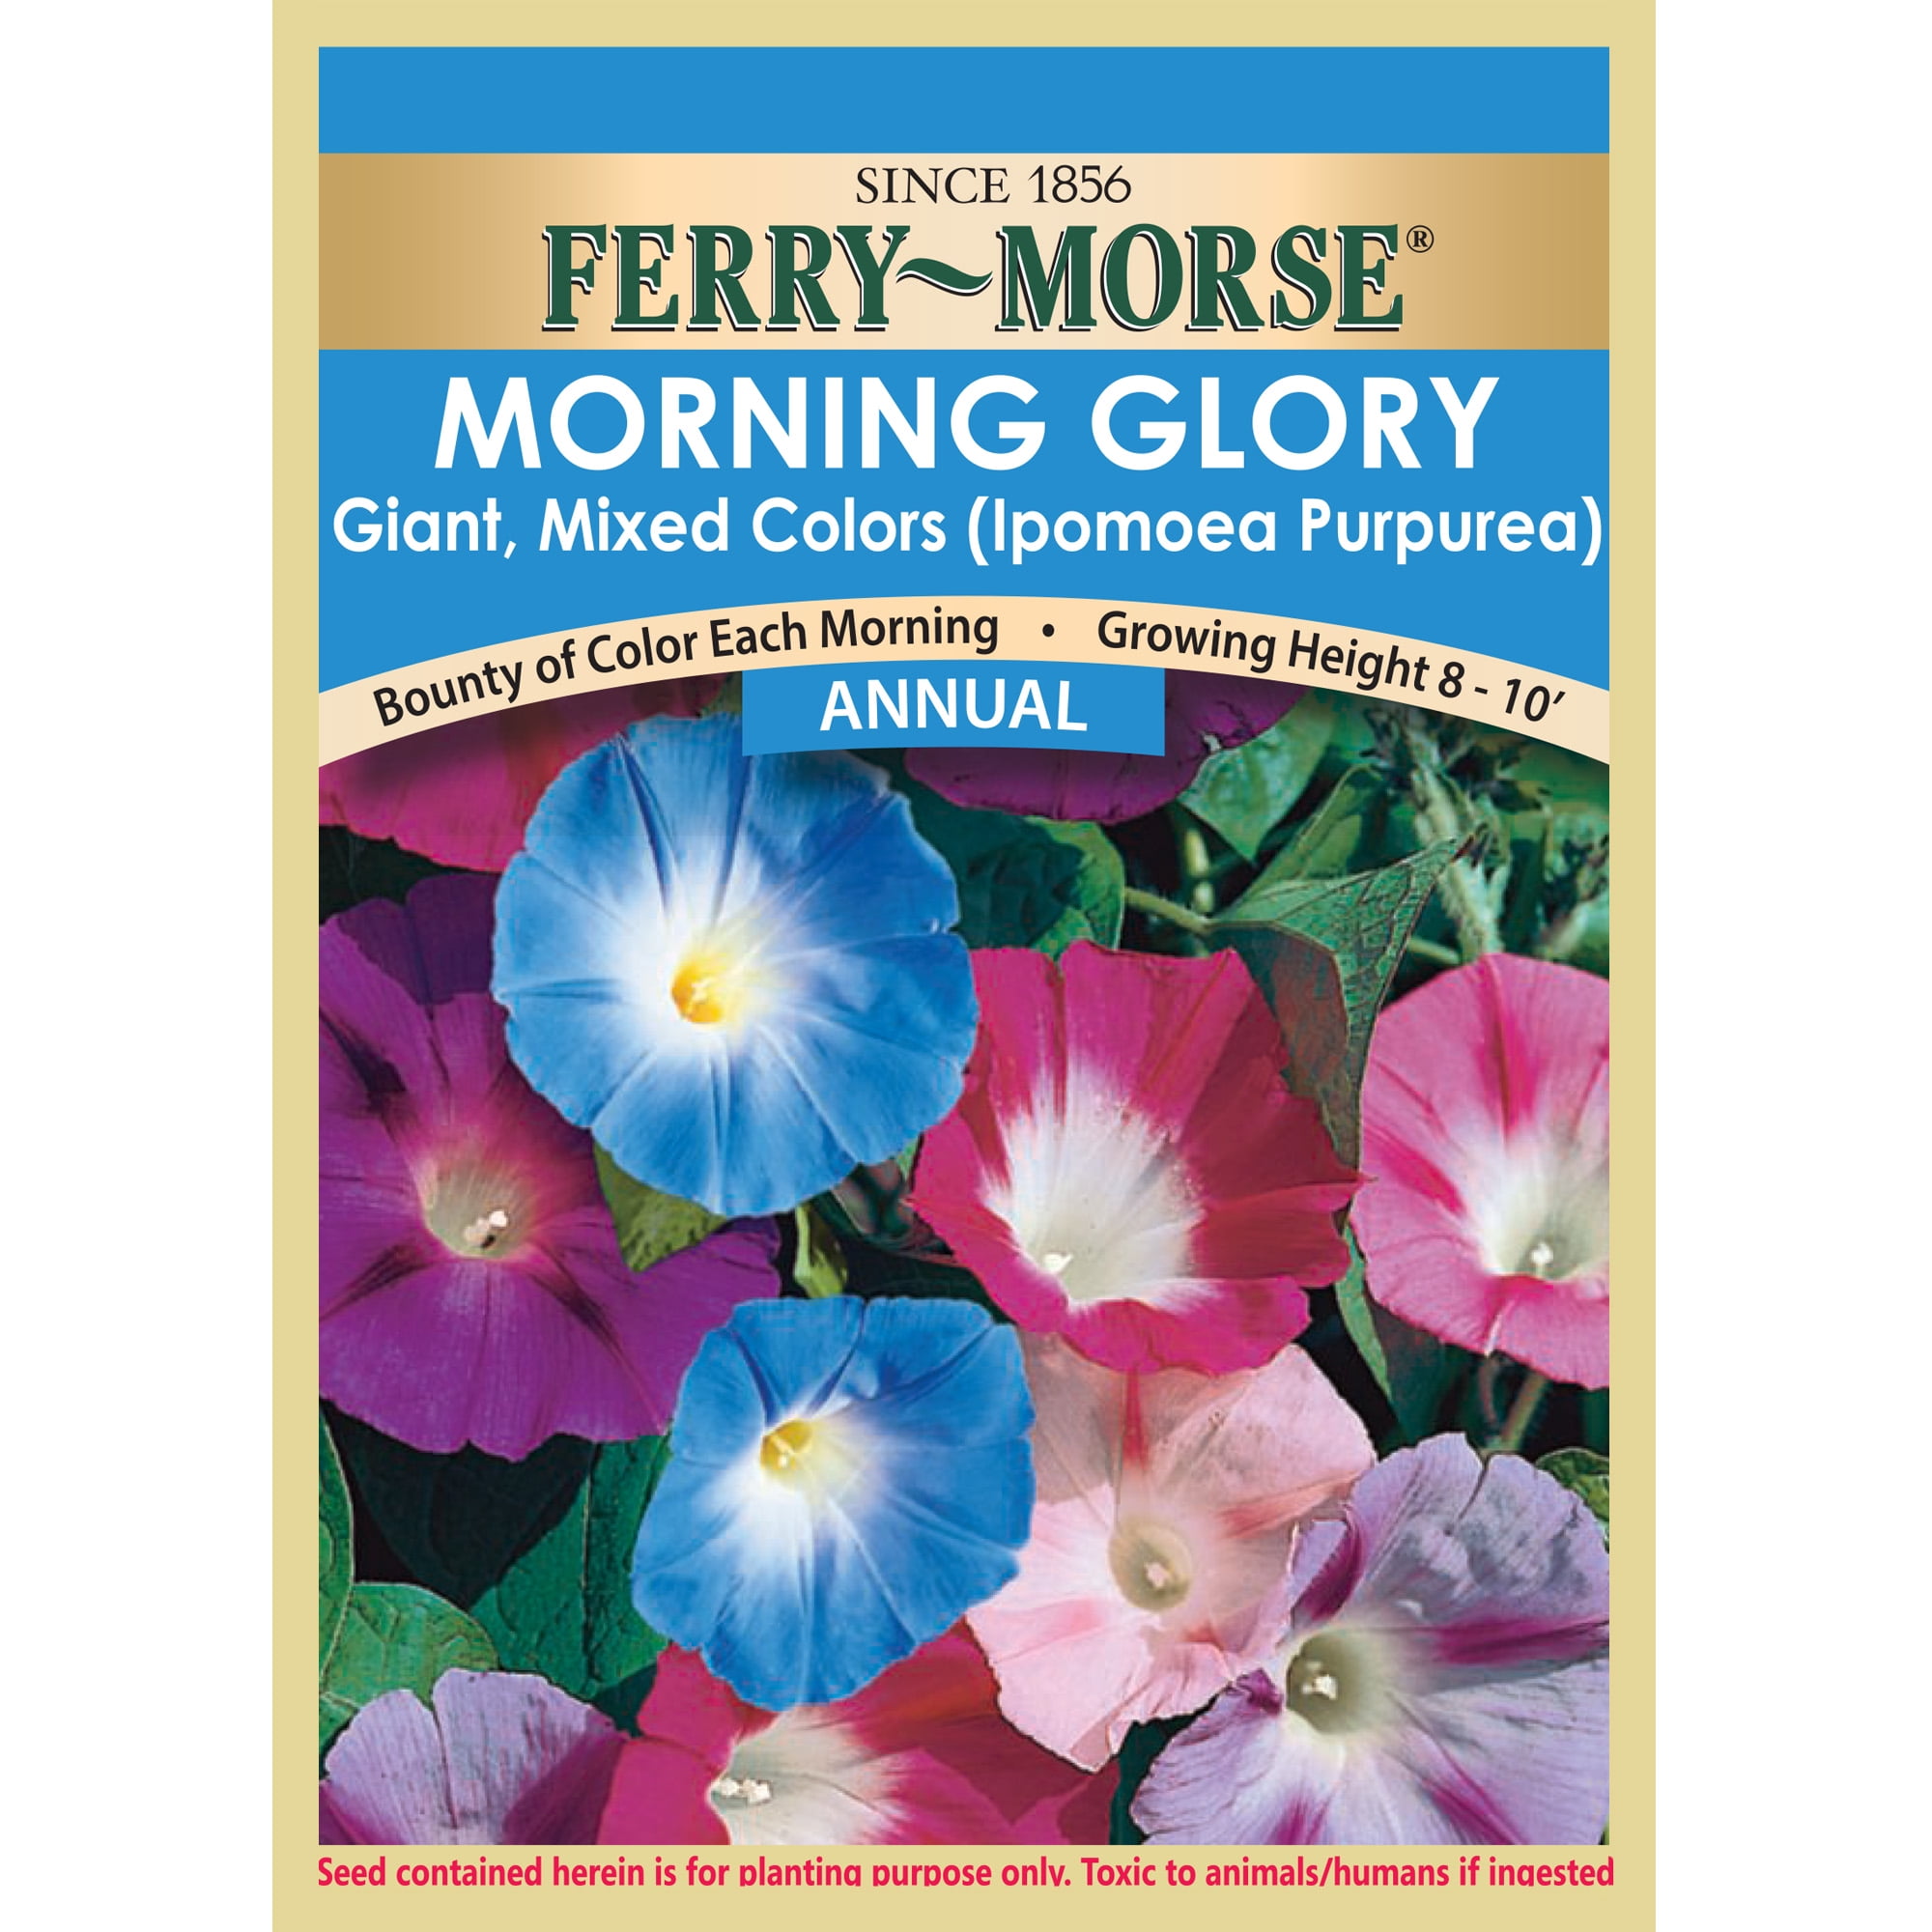 Ferry-Morse Morning Glory Giant Mixed Colors Flower Plant Seeds (1 Pack) - Seed Gardening, Full Sunlight